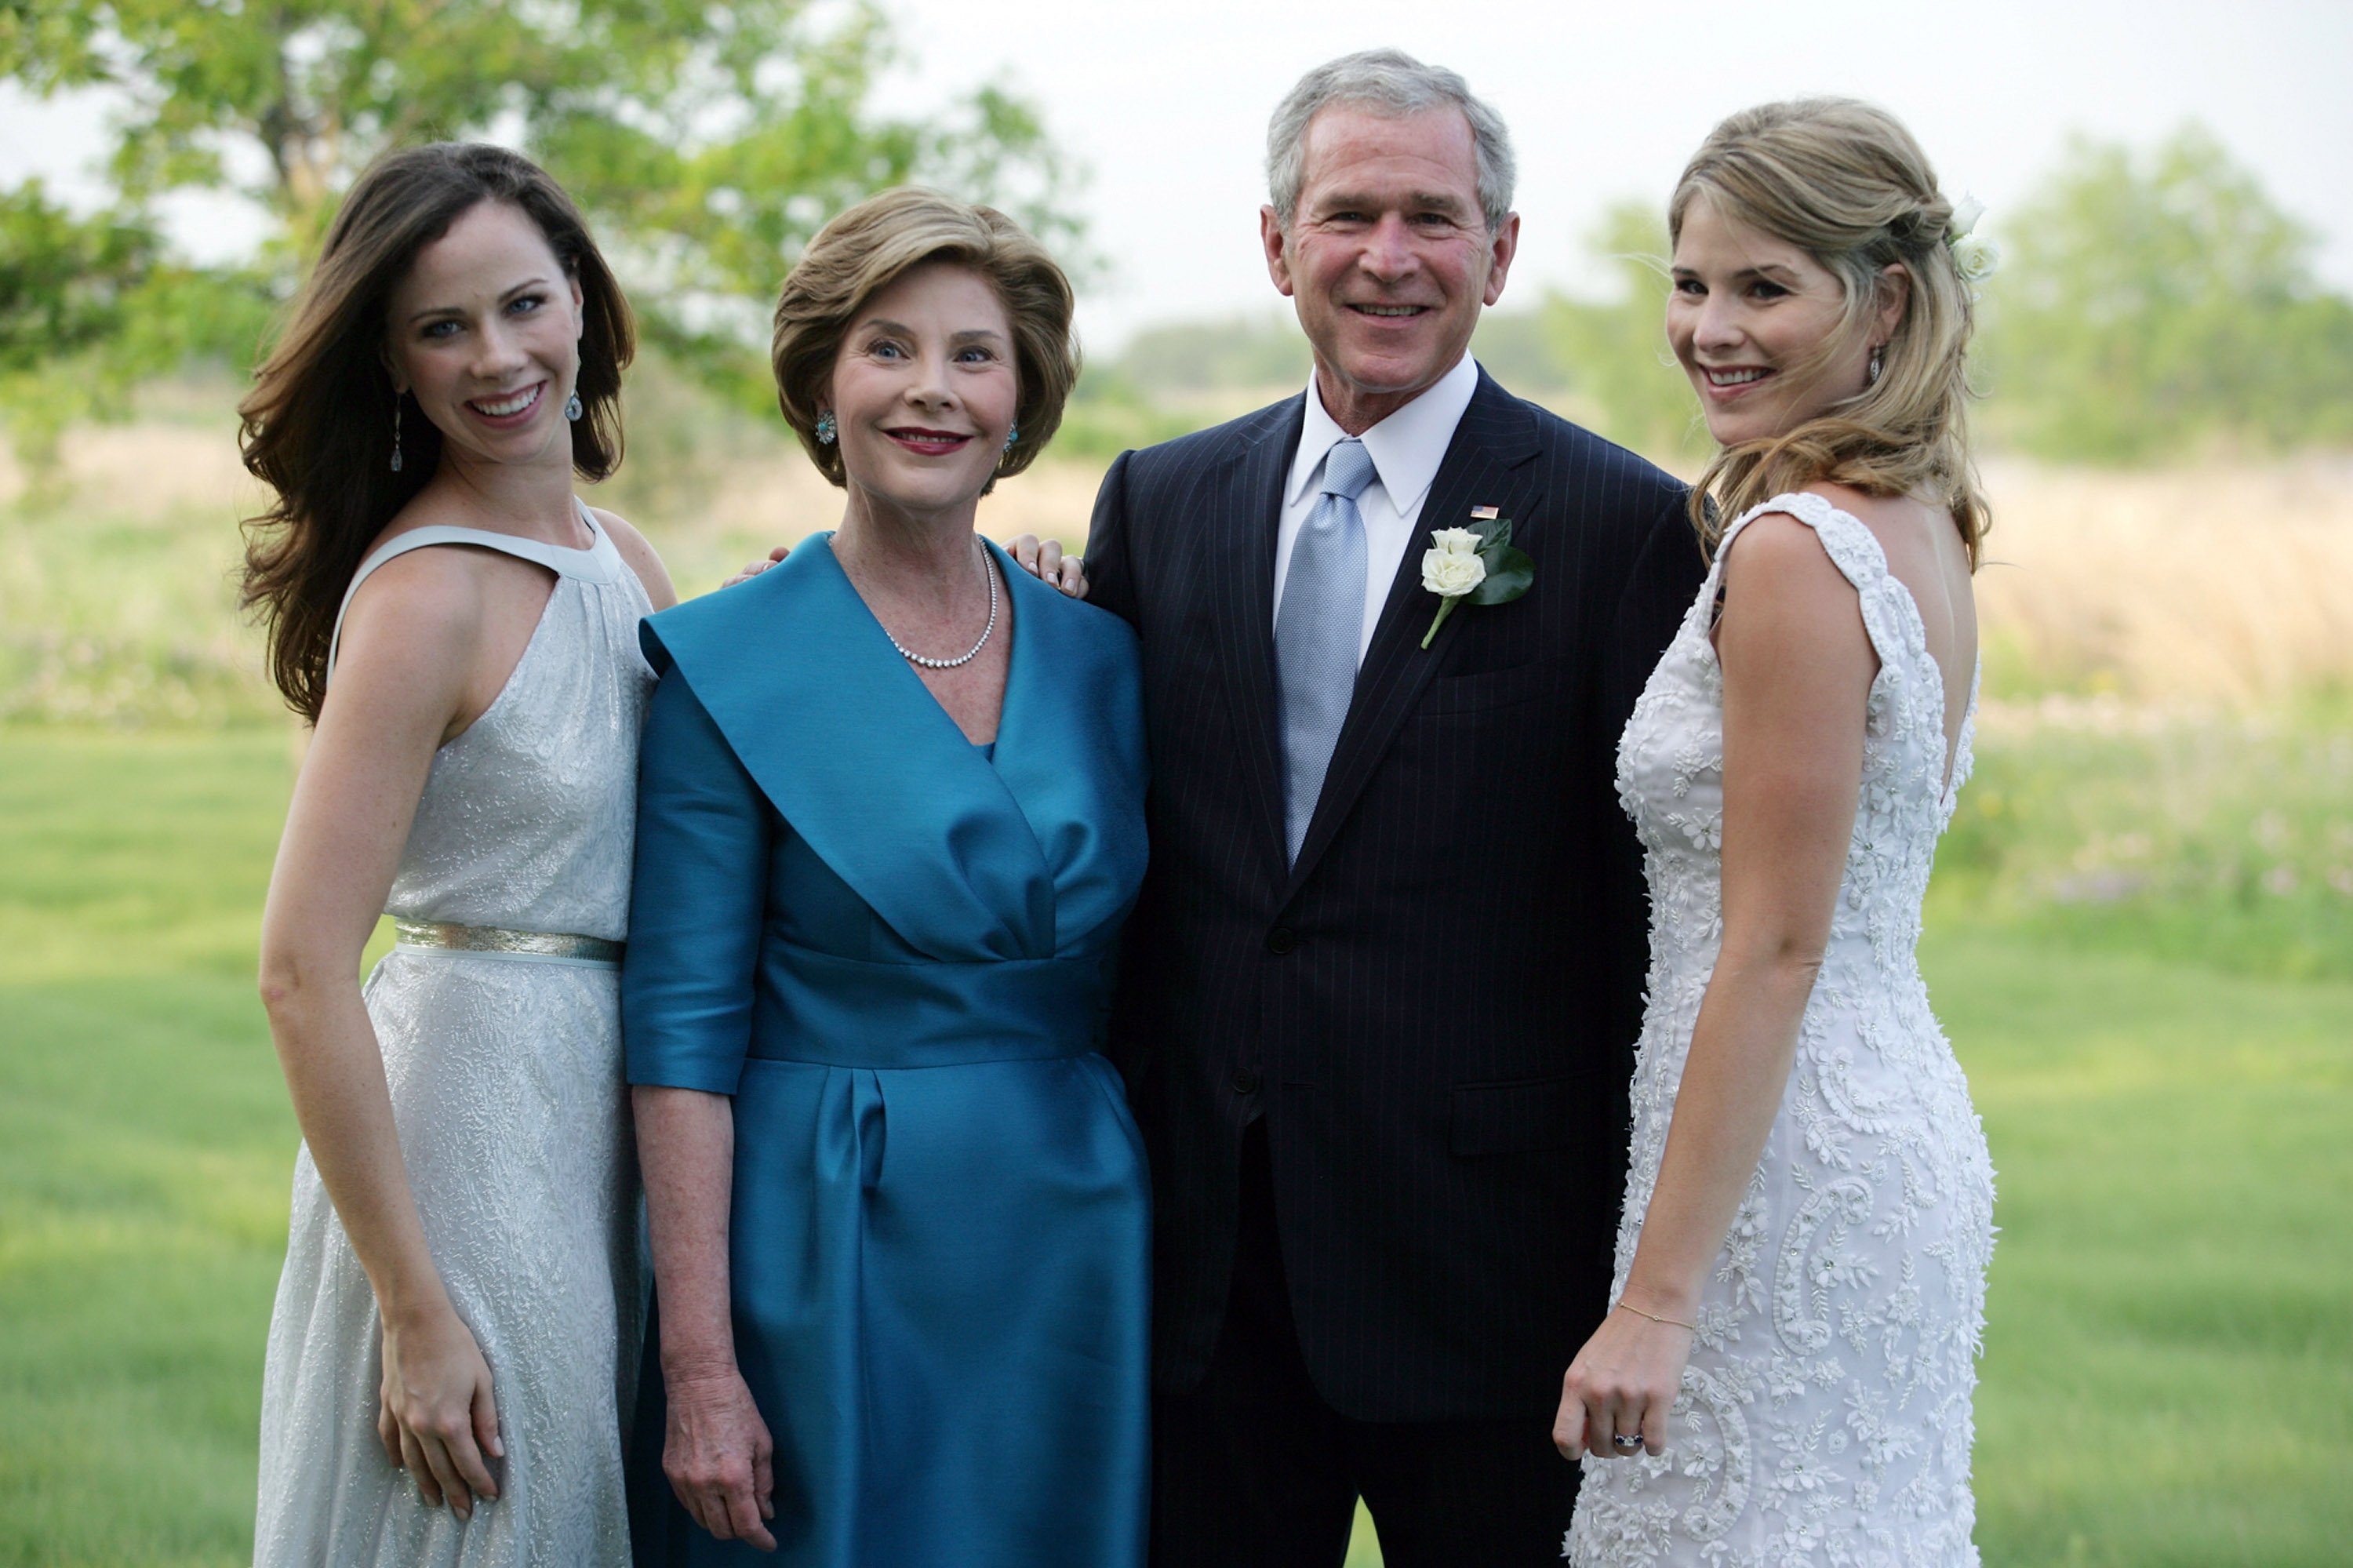 U.S. President George W. Bush and First Lady Laura Bush pose with daughters Jenna (R) and Barbara (L) on May 10, 2008 near Crawford, Texas ┃Source: Getty Images